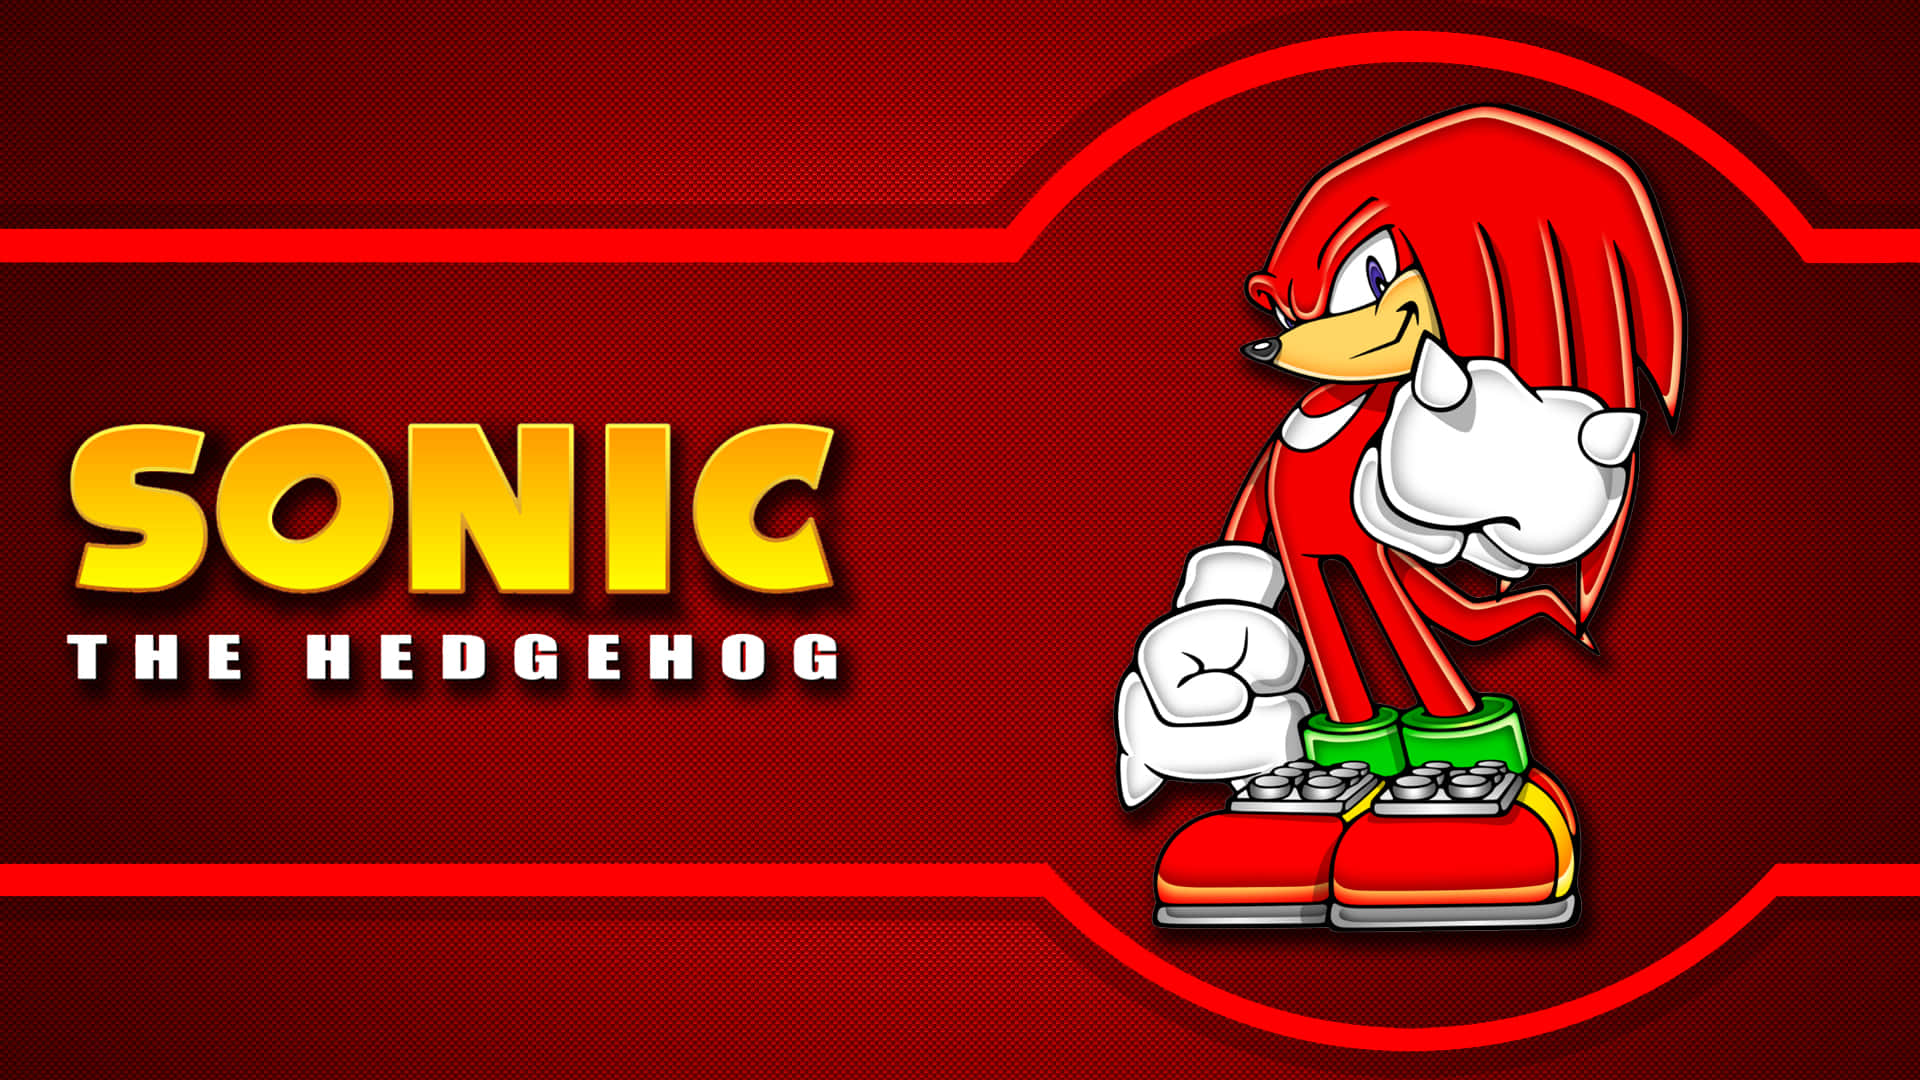 Knuckles, The Echidna Ready For Action Background